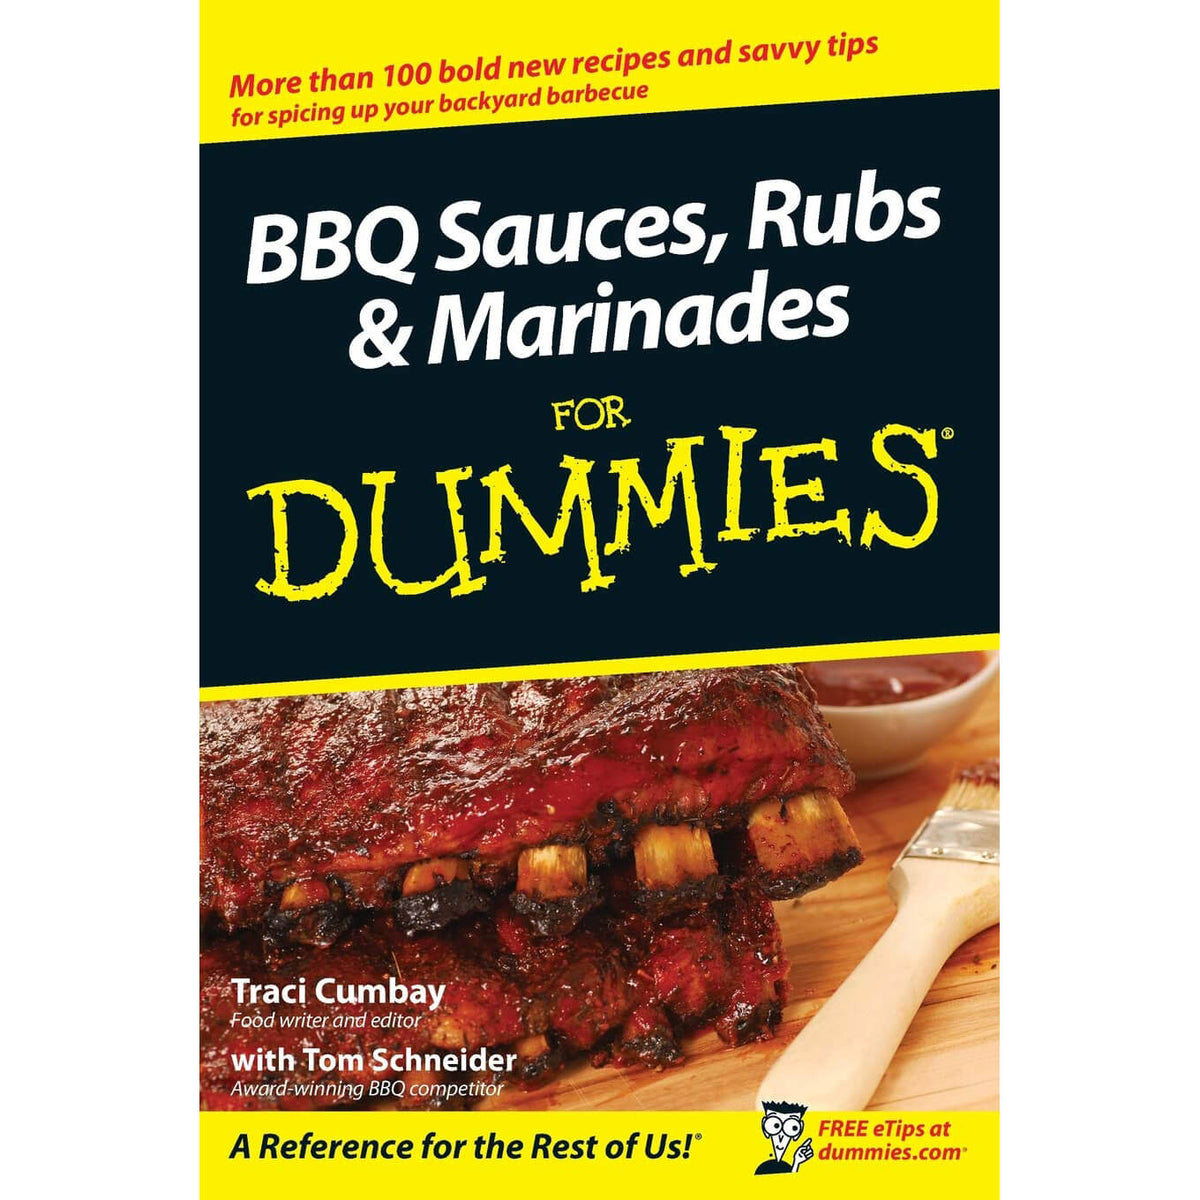 BBQ Sauces, Rubs And Marinades For Dummies front cover.